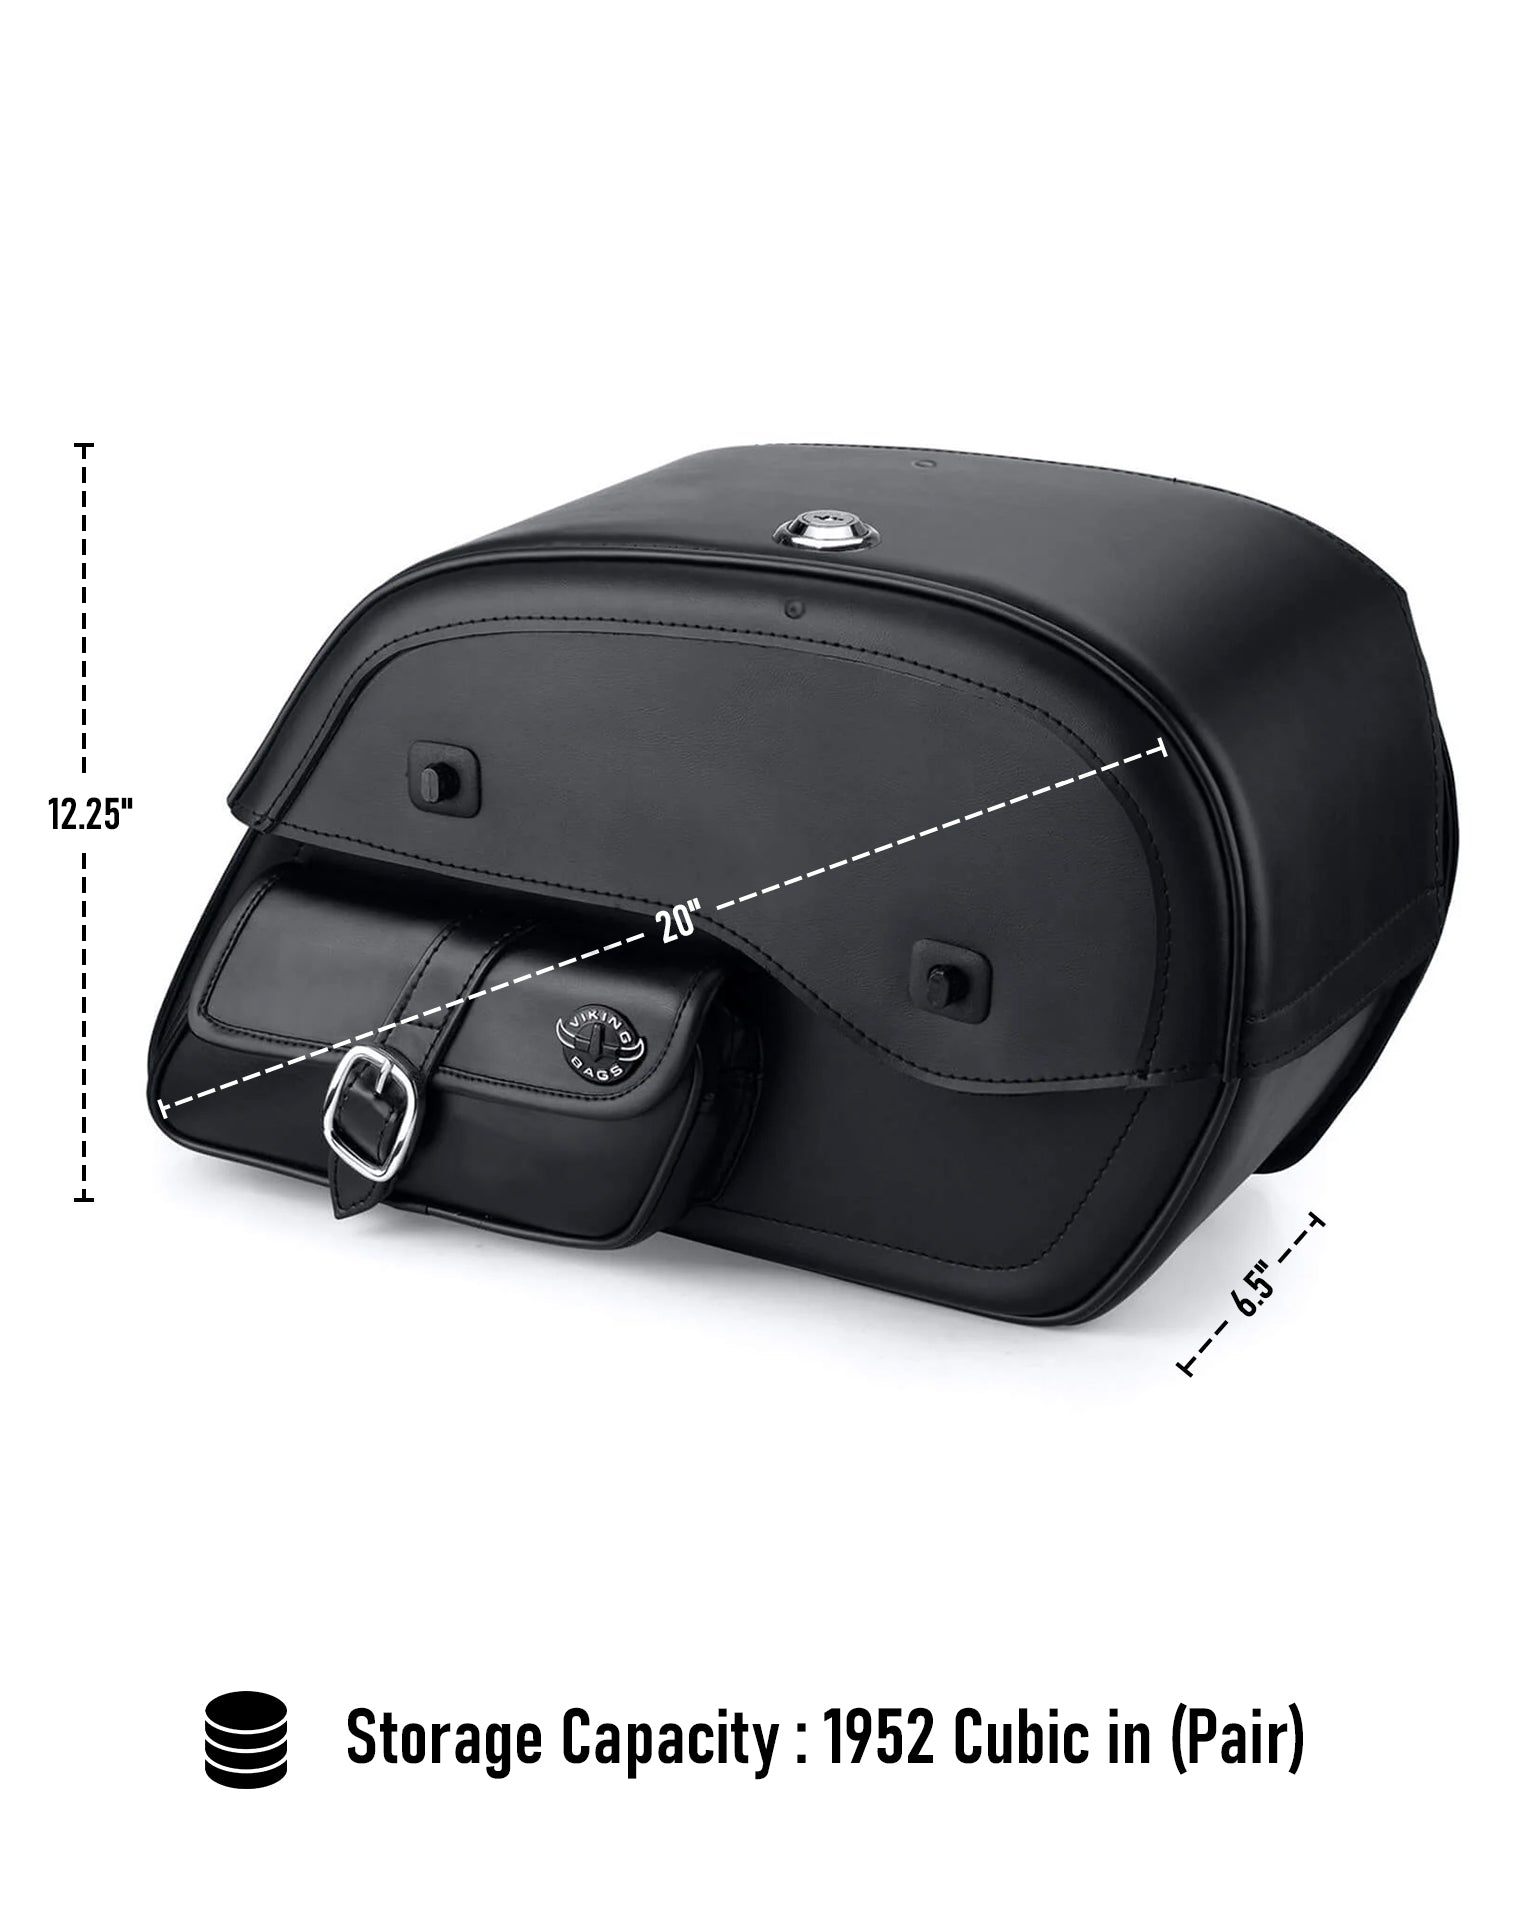 Viking Essential Side Pocket Large Kawasaki Vulcan 750 Vn750 Leather Motorcycle Saddlebags Can Store Your Ridings Gears